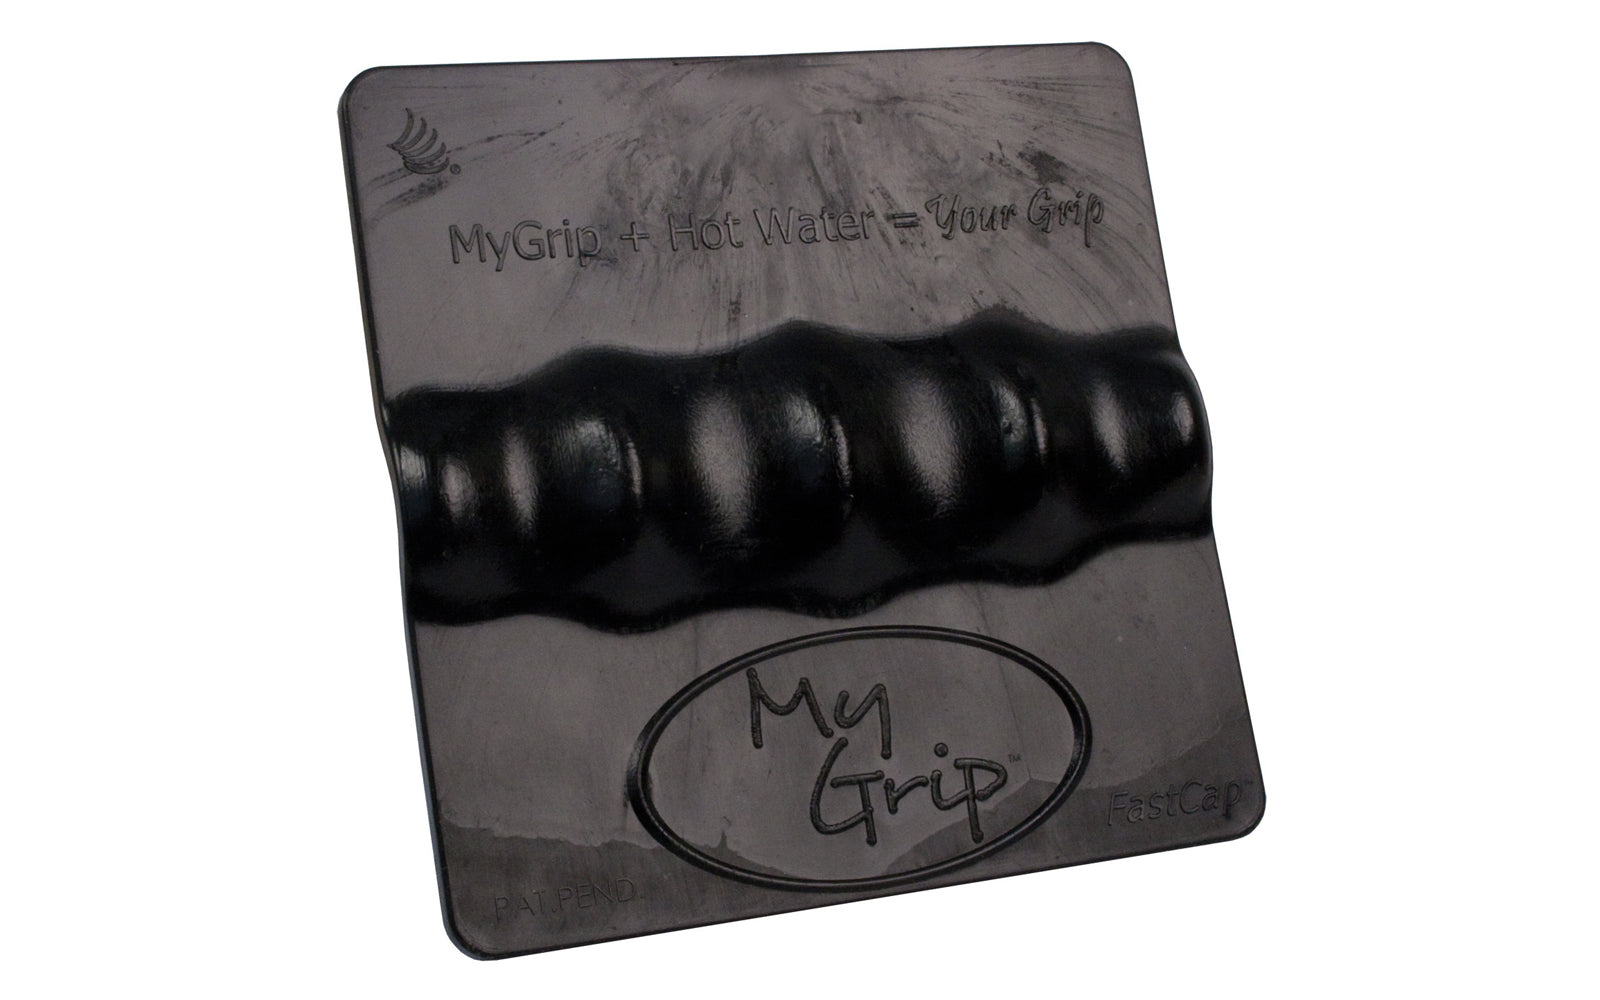 The FastCap My Grip Custom Grip gives you the ultimate comfort grip on your hand tools, sports equipment, or anything else with a handle. Excellent for tools, handles, power tools, handle bars, sporting equipment & more. FastCap My Grip 4 Pack. Just place in hot water for 2 minutes & mold. Reduces fatigue & vibration